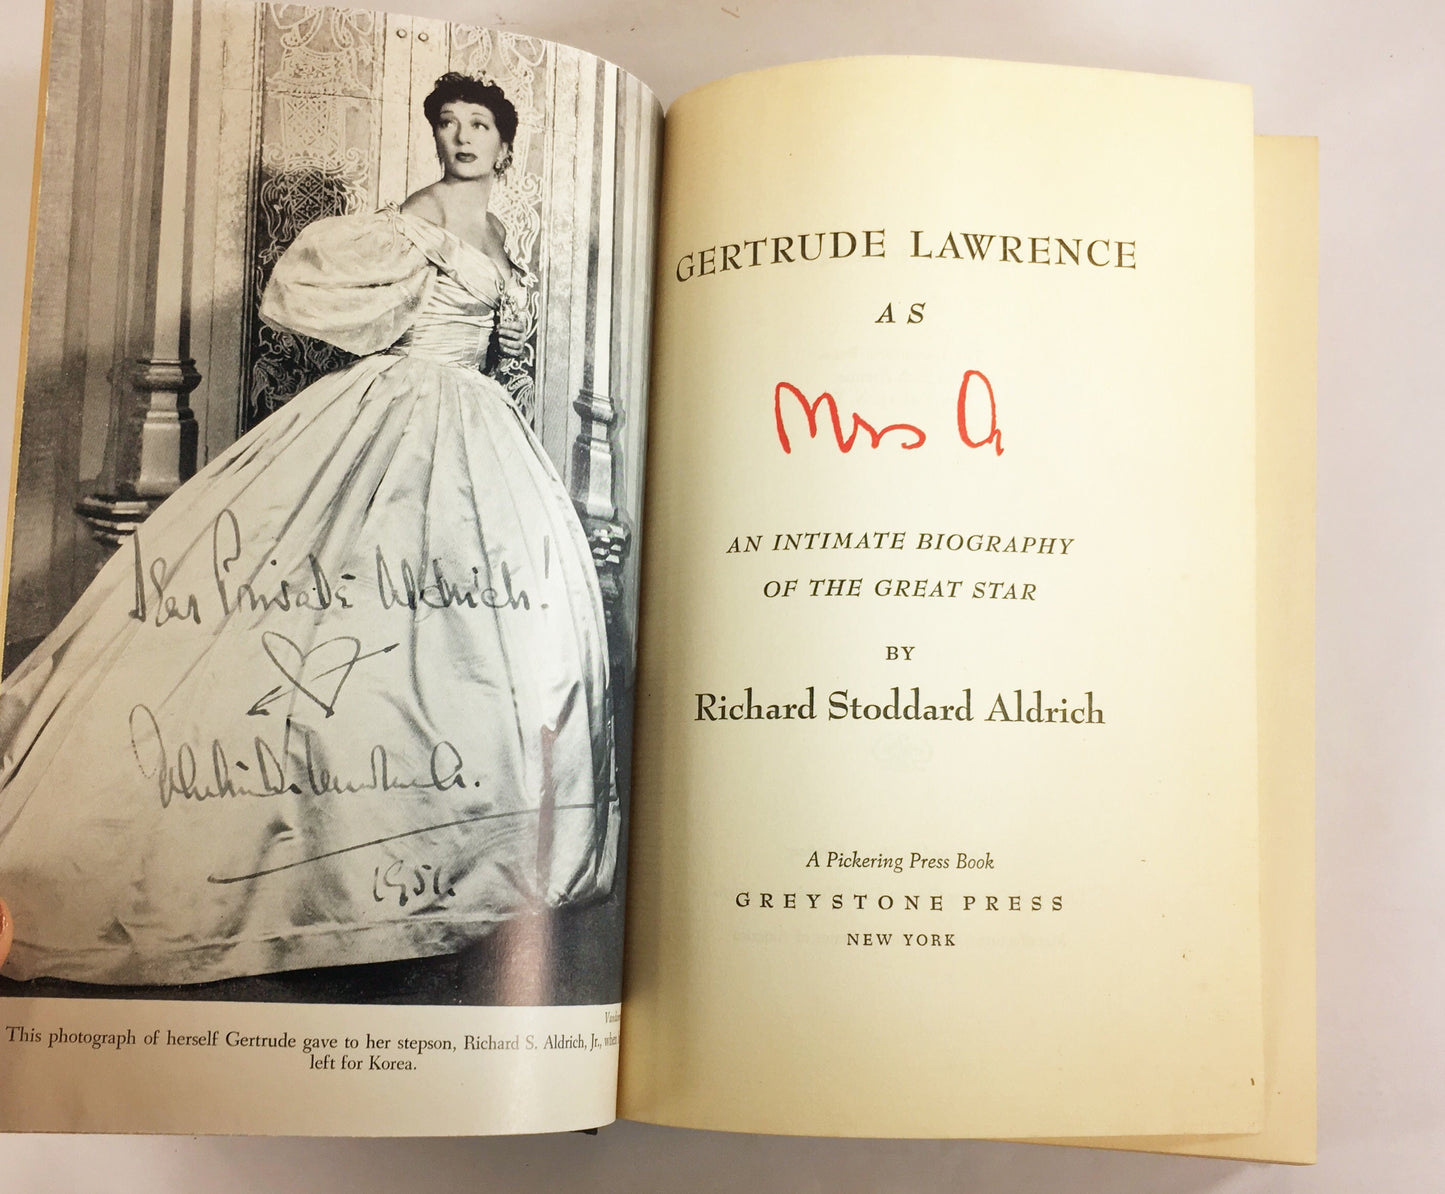 Intimate Biography of Great Star Gertrude Lawrence by her husband Richard Stoddard Aldrich 1954 FIRST EDITION vintage book actress Broadway